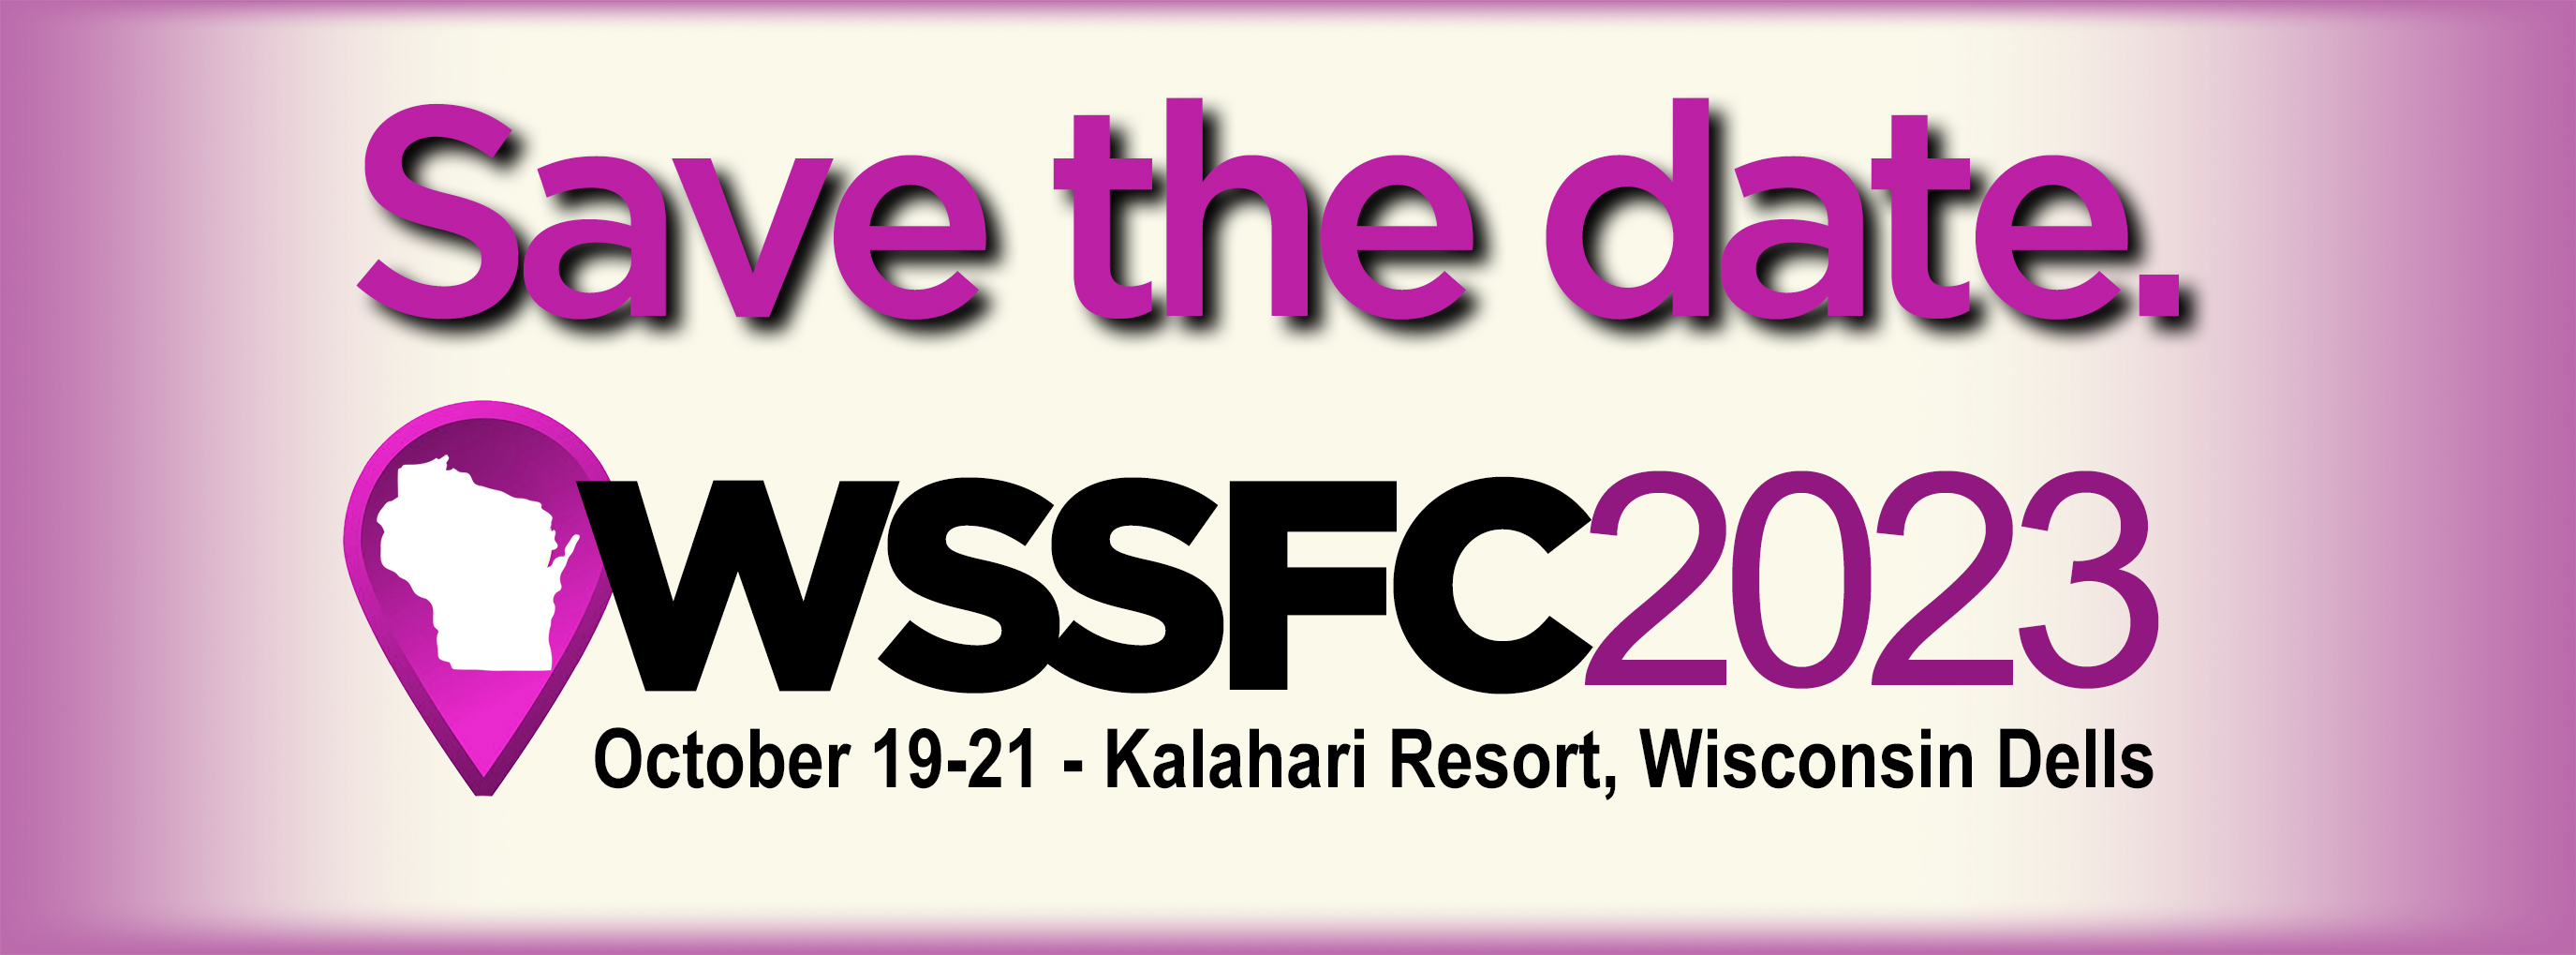 WSSFC Save the Date